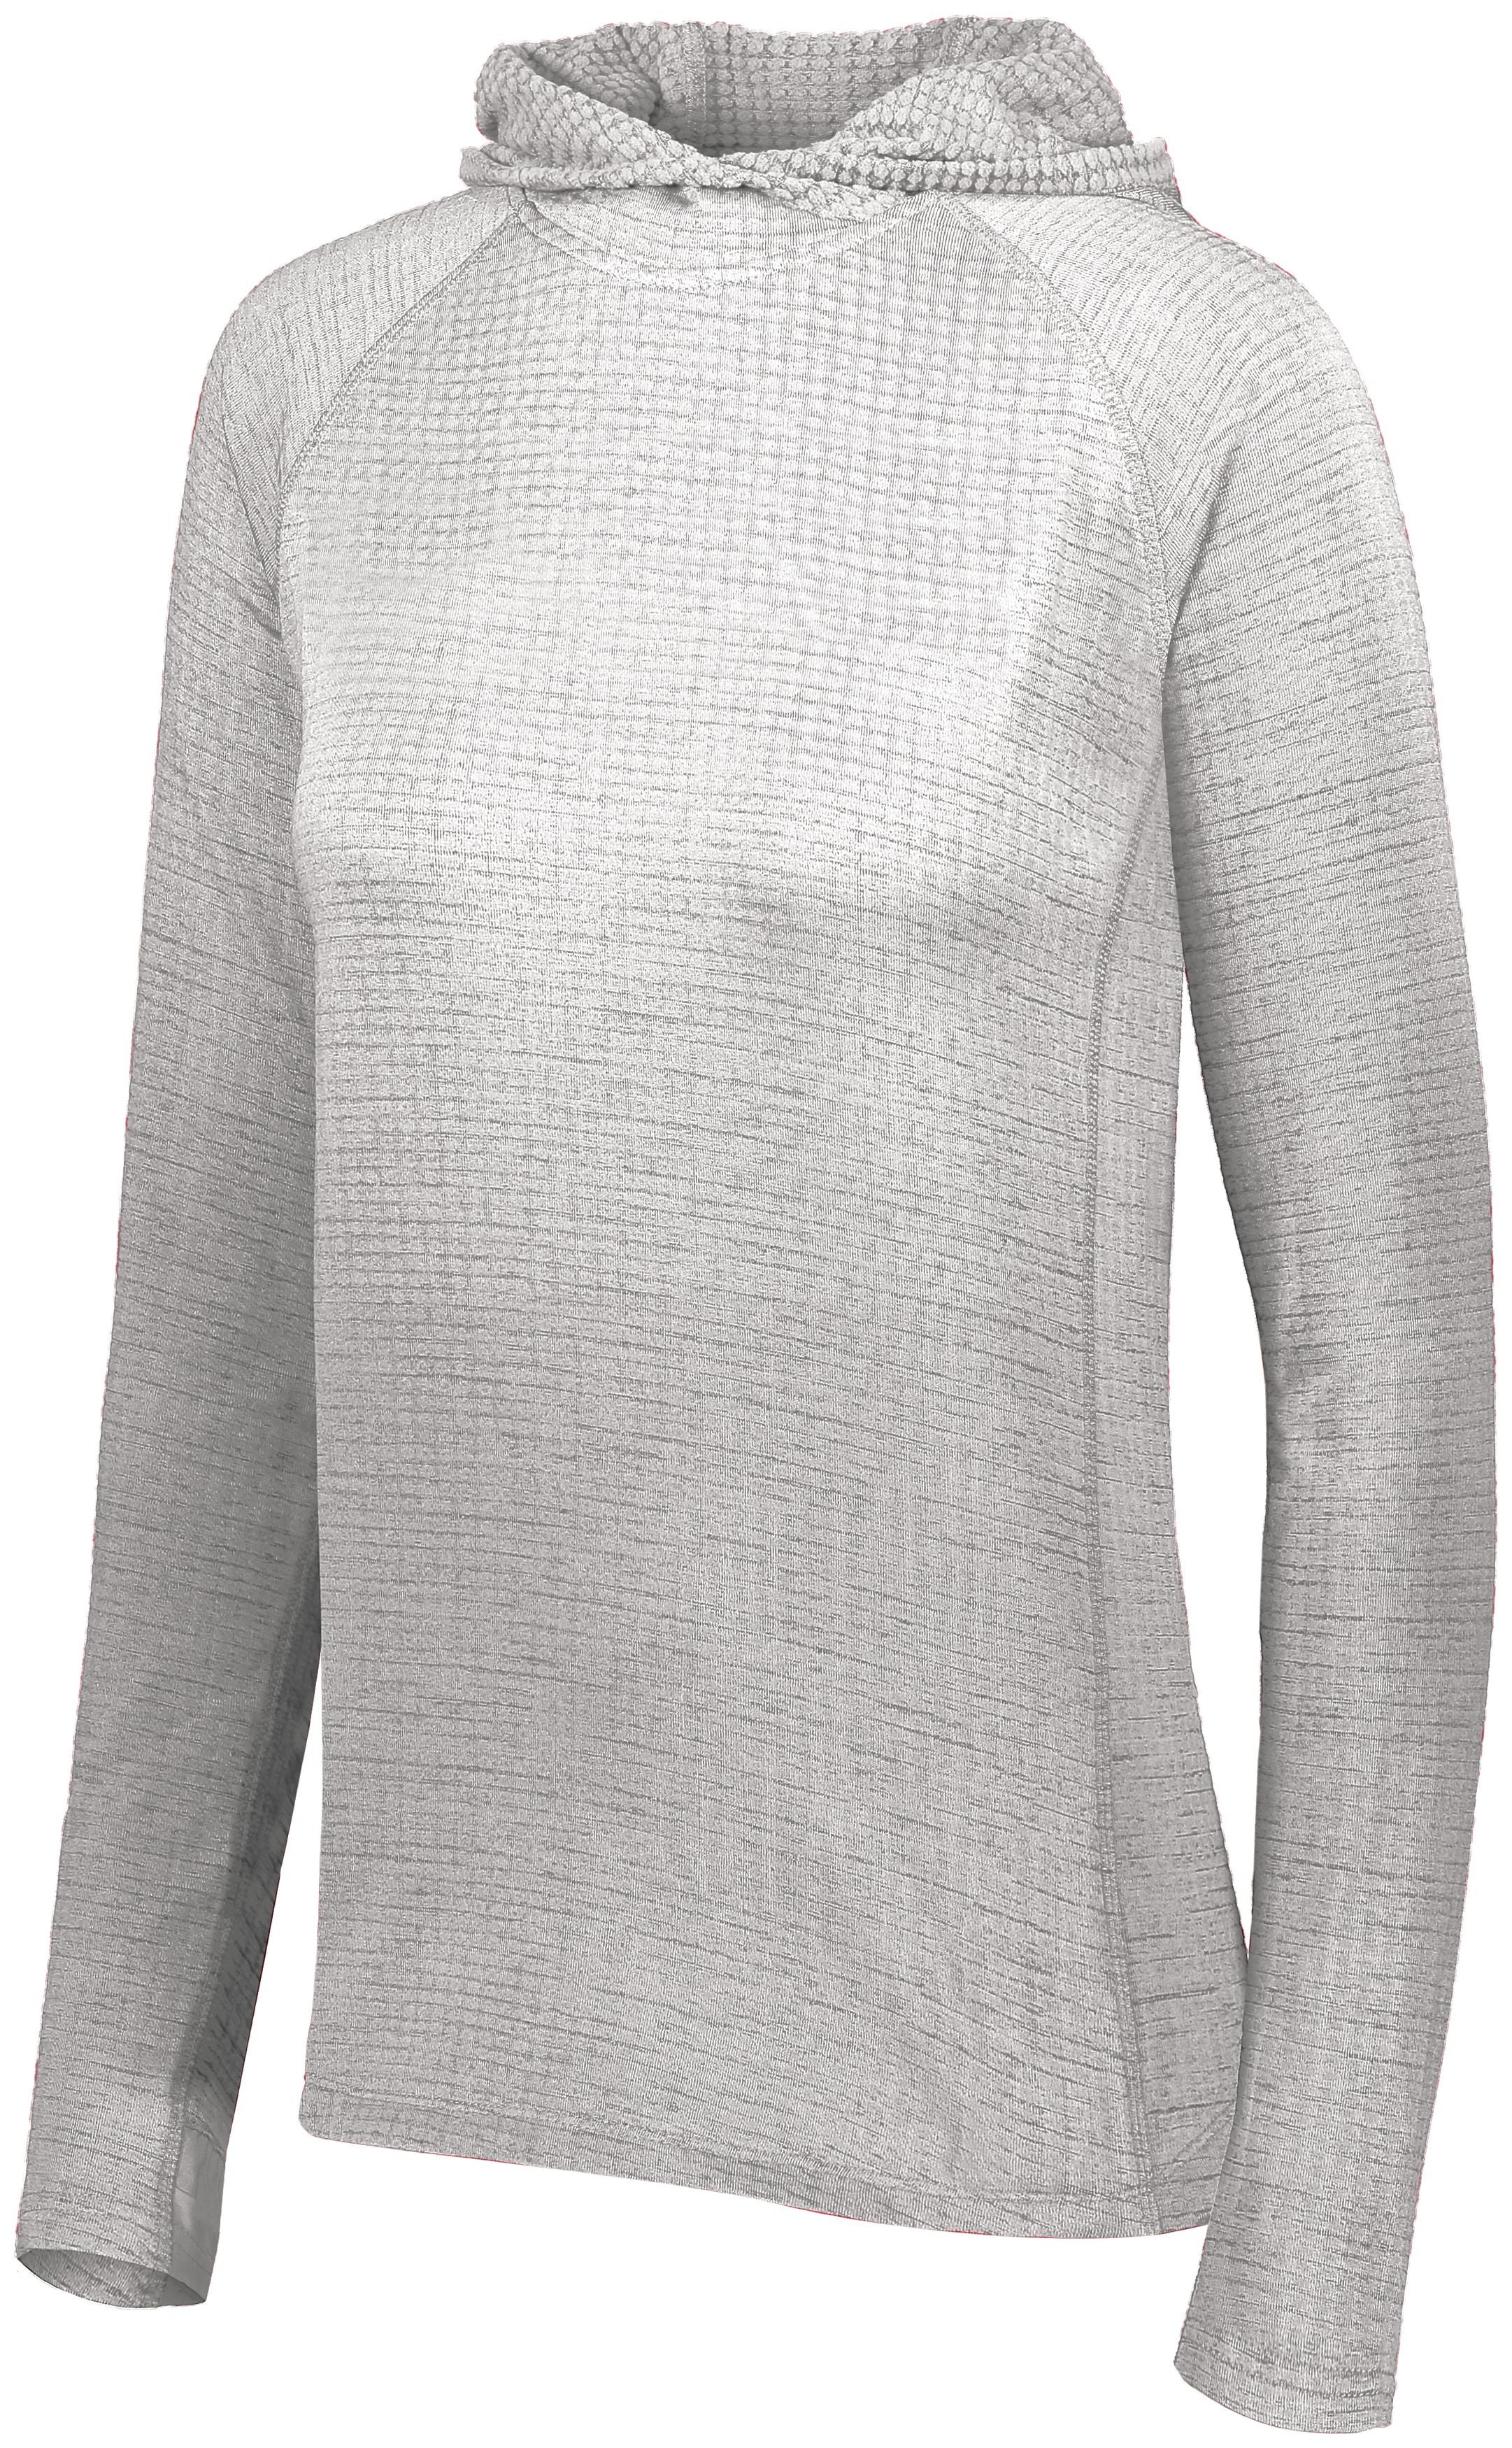 Holloway Ladies 3D Regulate Lightweight Pullover in White Heather  -Part of the Ladies, Ladies-Pullover, Holloway, Outerwear, 3D-Collection product lines at KanaleyCreations.com